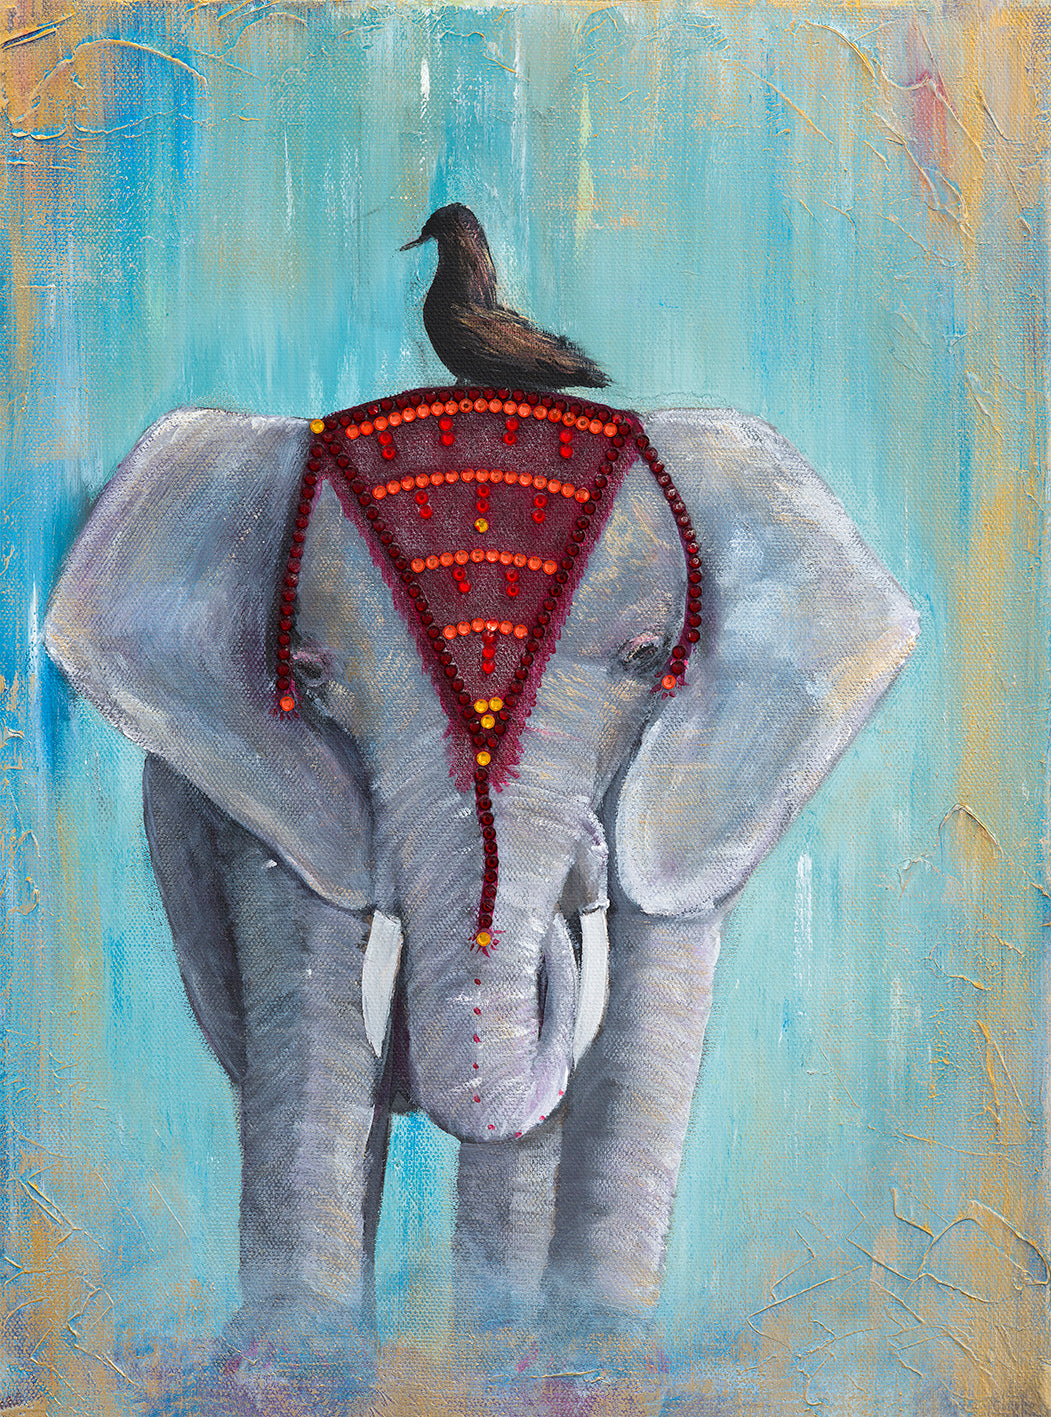 Original painting of a regal Asian elephant in a headdress with a blackbird sitting in it's head